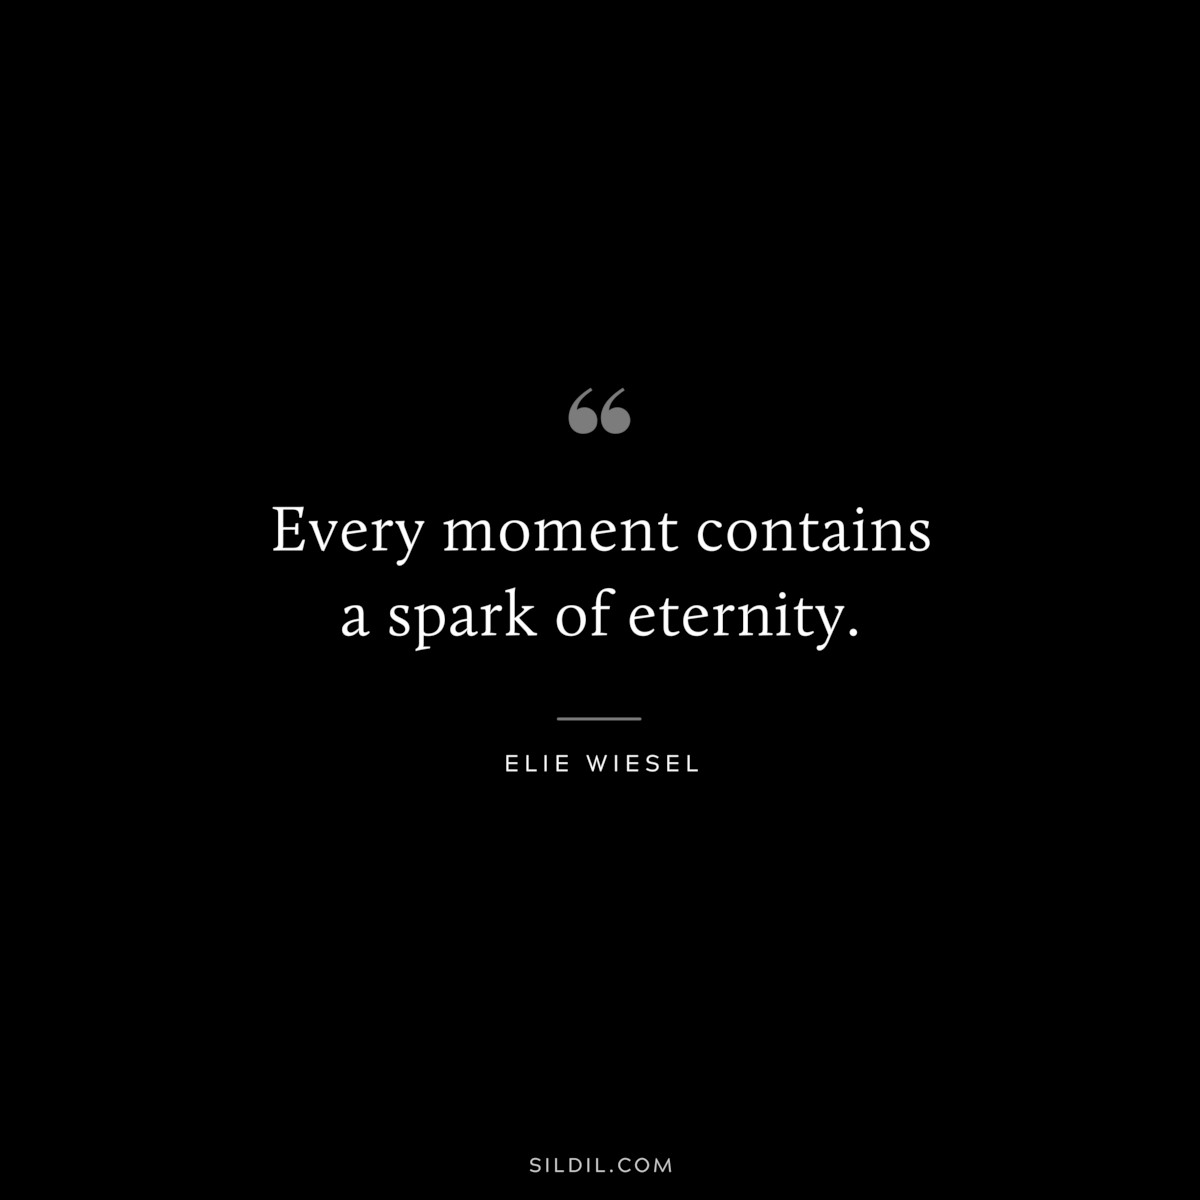 Every moment contains a spark of eternity. ― Elie Wiesel